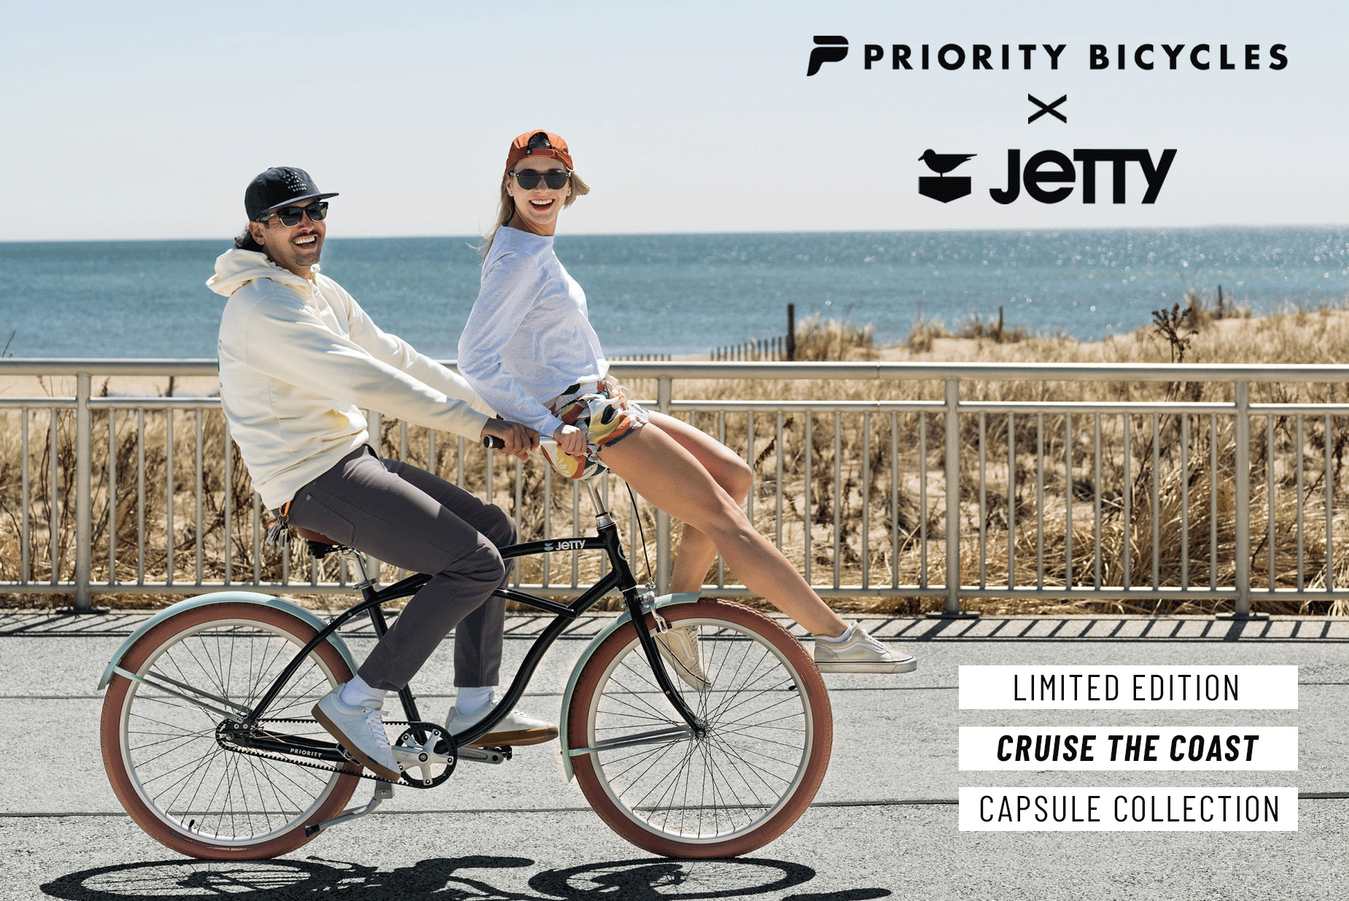 Cruise the Coast with Jetty and Priority Bicycles